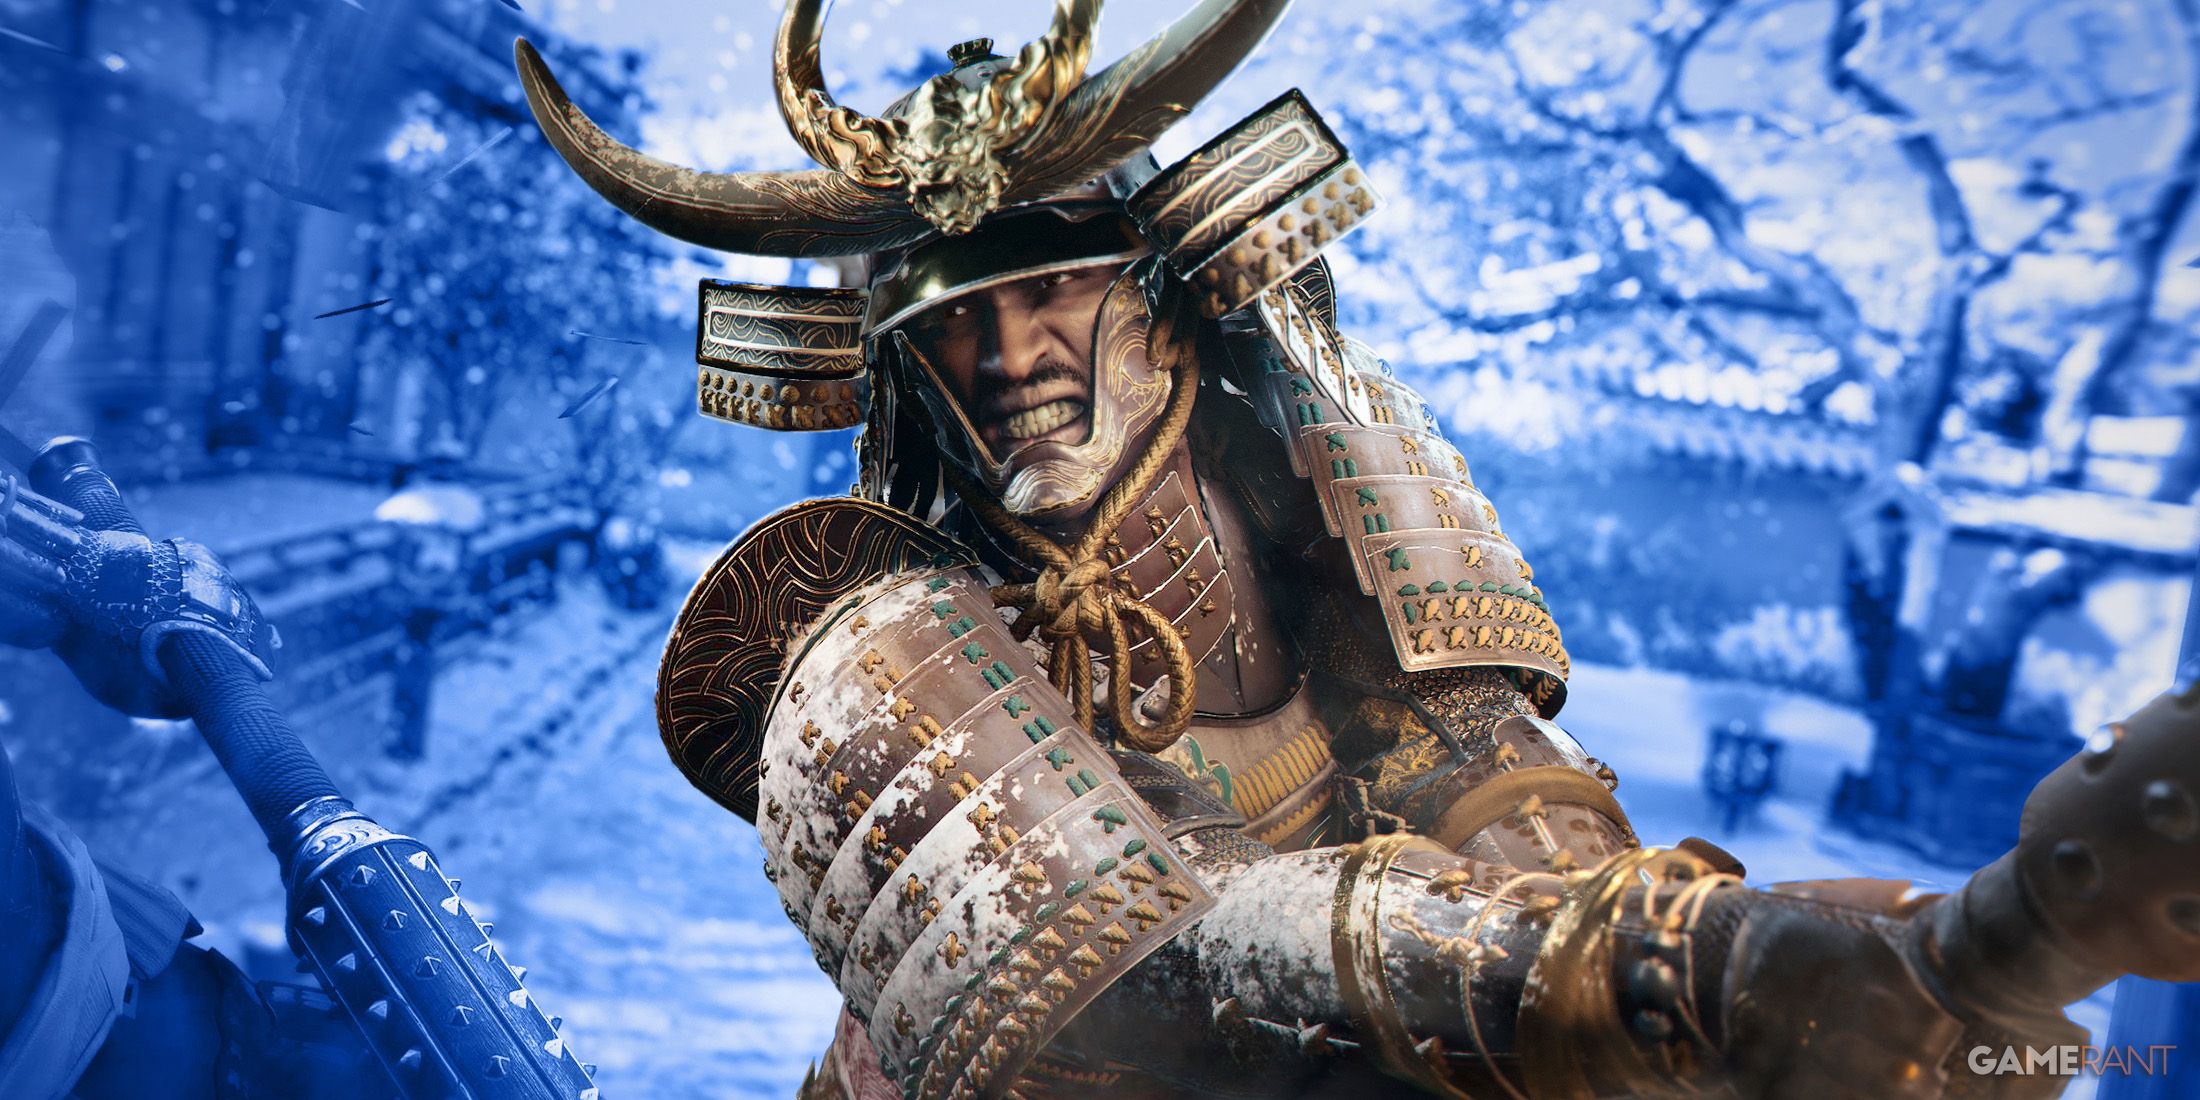 Assassin's Creed Shadows angry Yasuke in samurai armor hitting an enemy with a mace club blue background swap